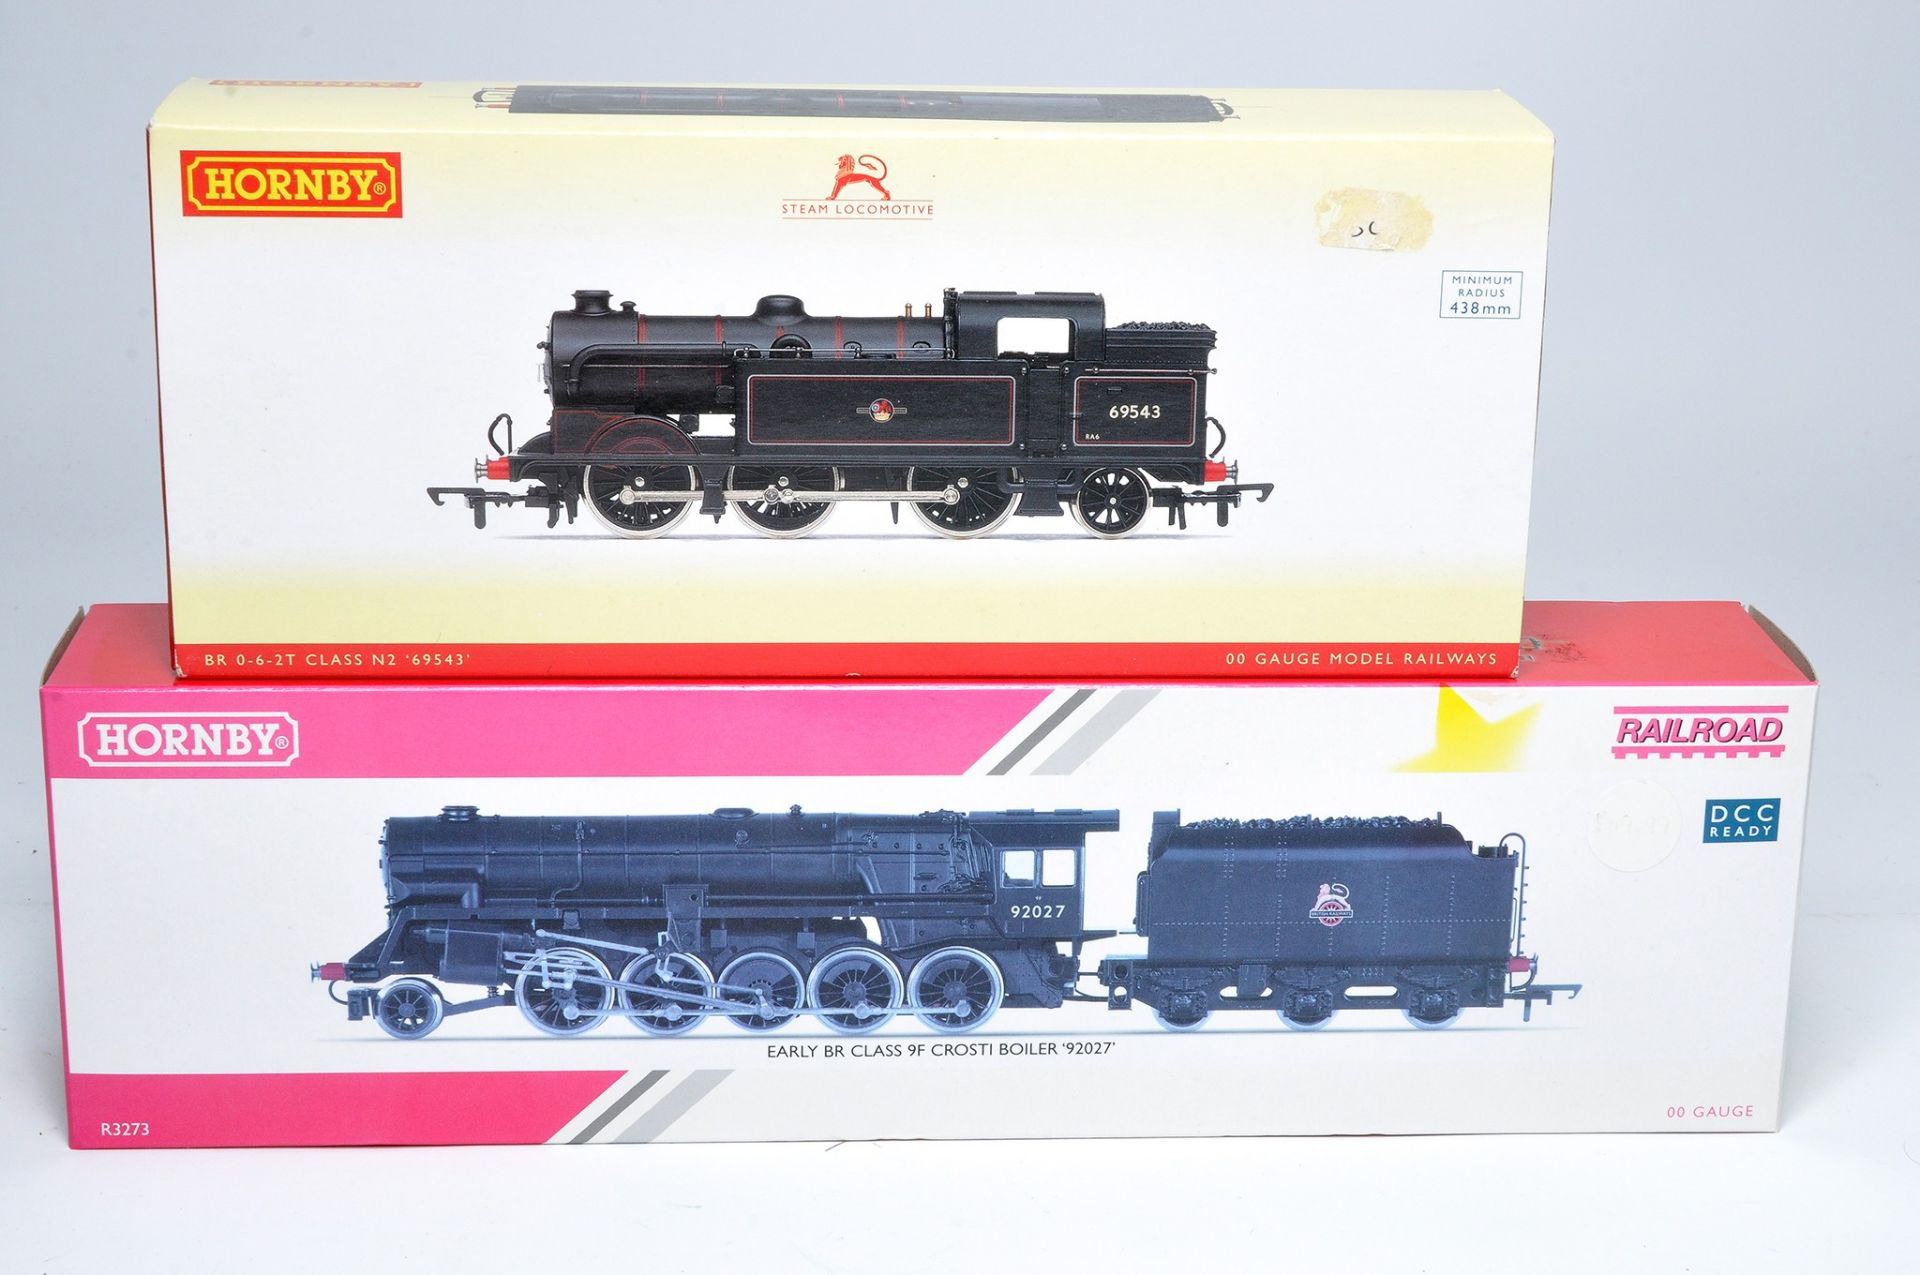 Hornby Model Railway comprising duo of locomotive issues including No. R3188 Class N2 69543 plus No.